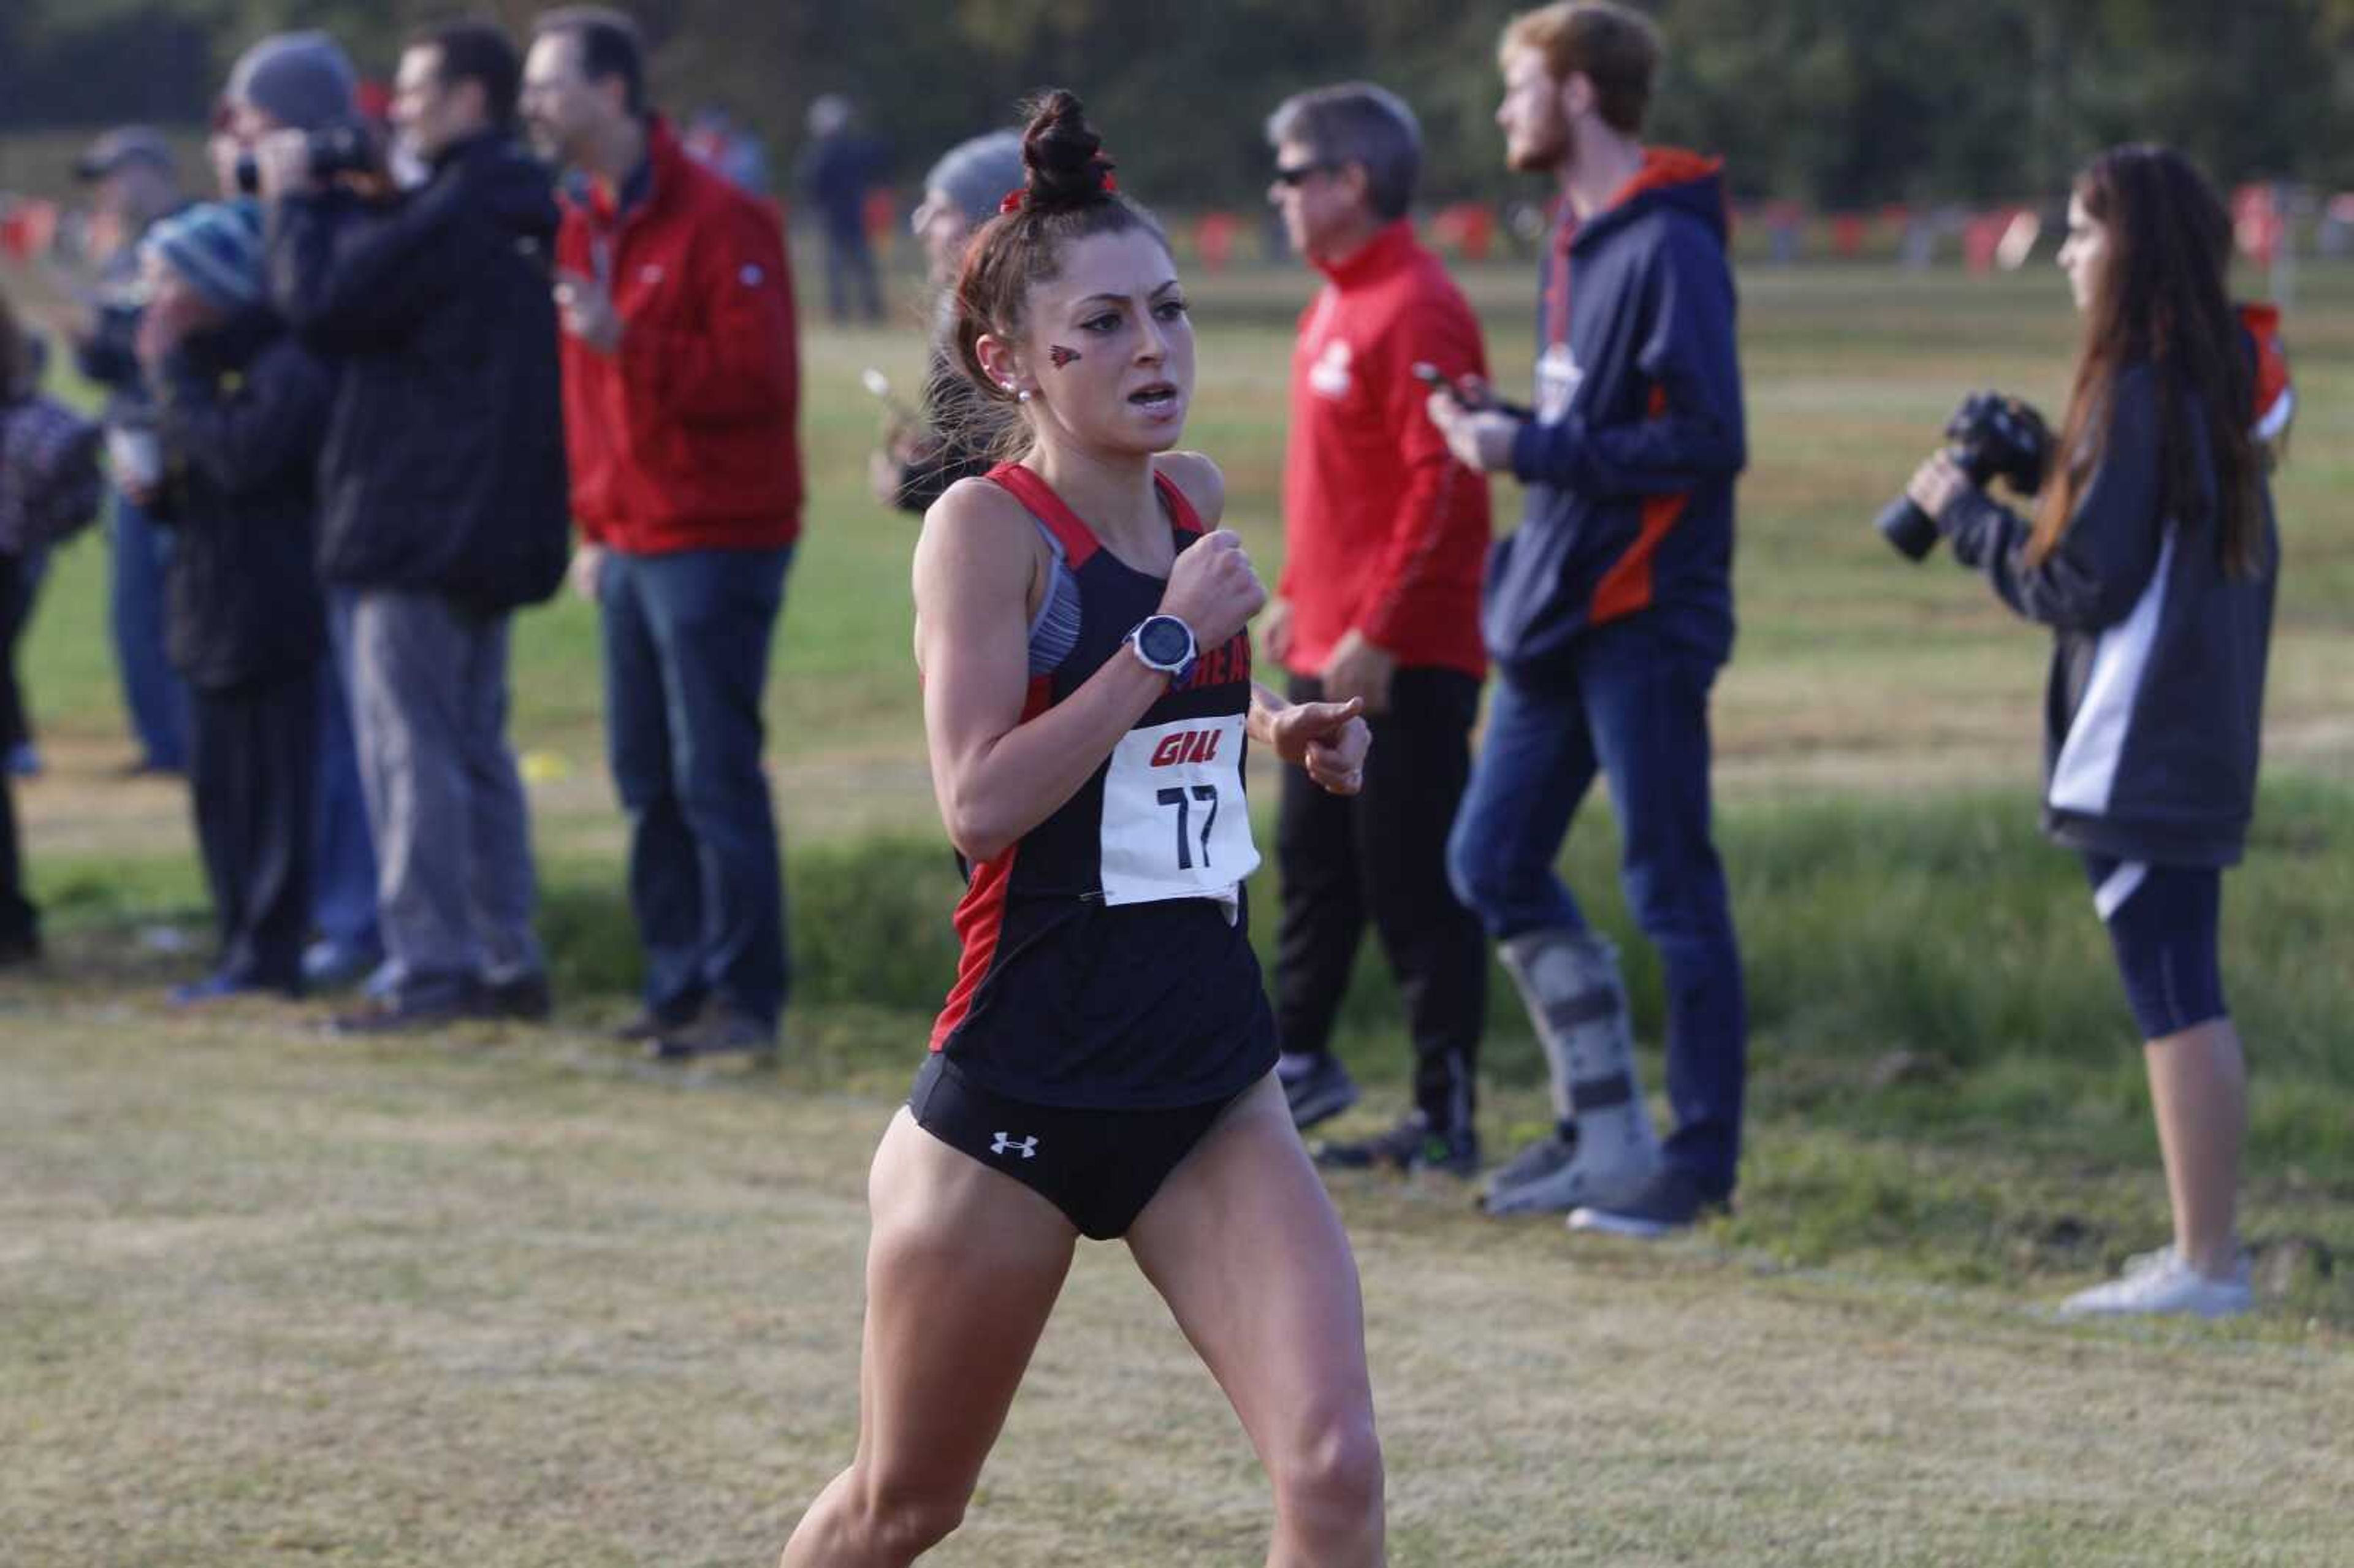 Senior Sydney O'Brien strides out during the OVC cross country championship in Cape Girardeau on Oct. 27. Photo by Joshua Dodge